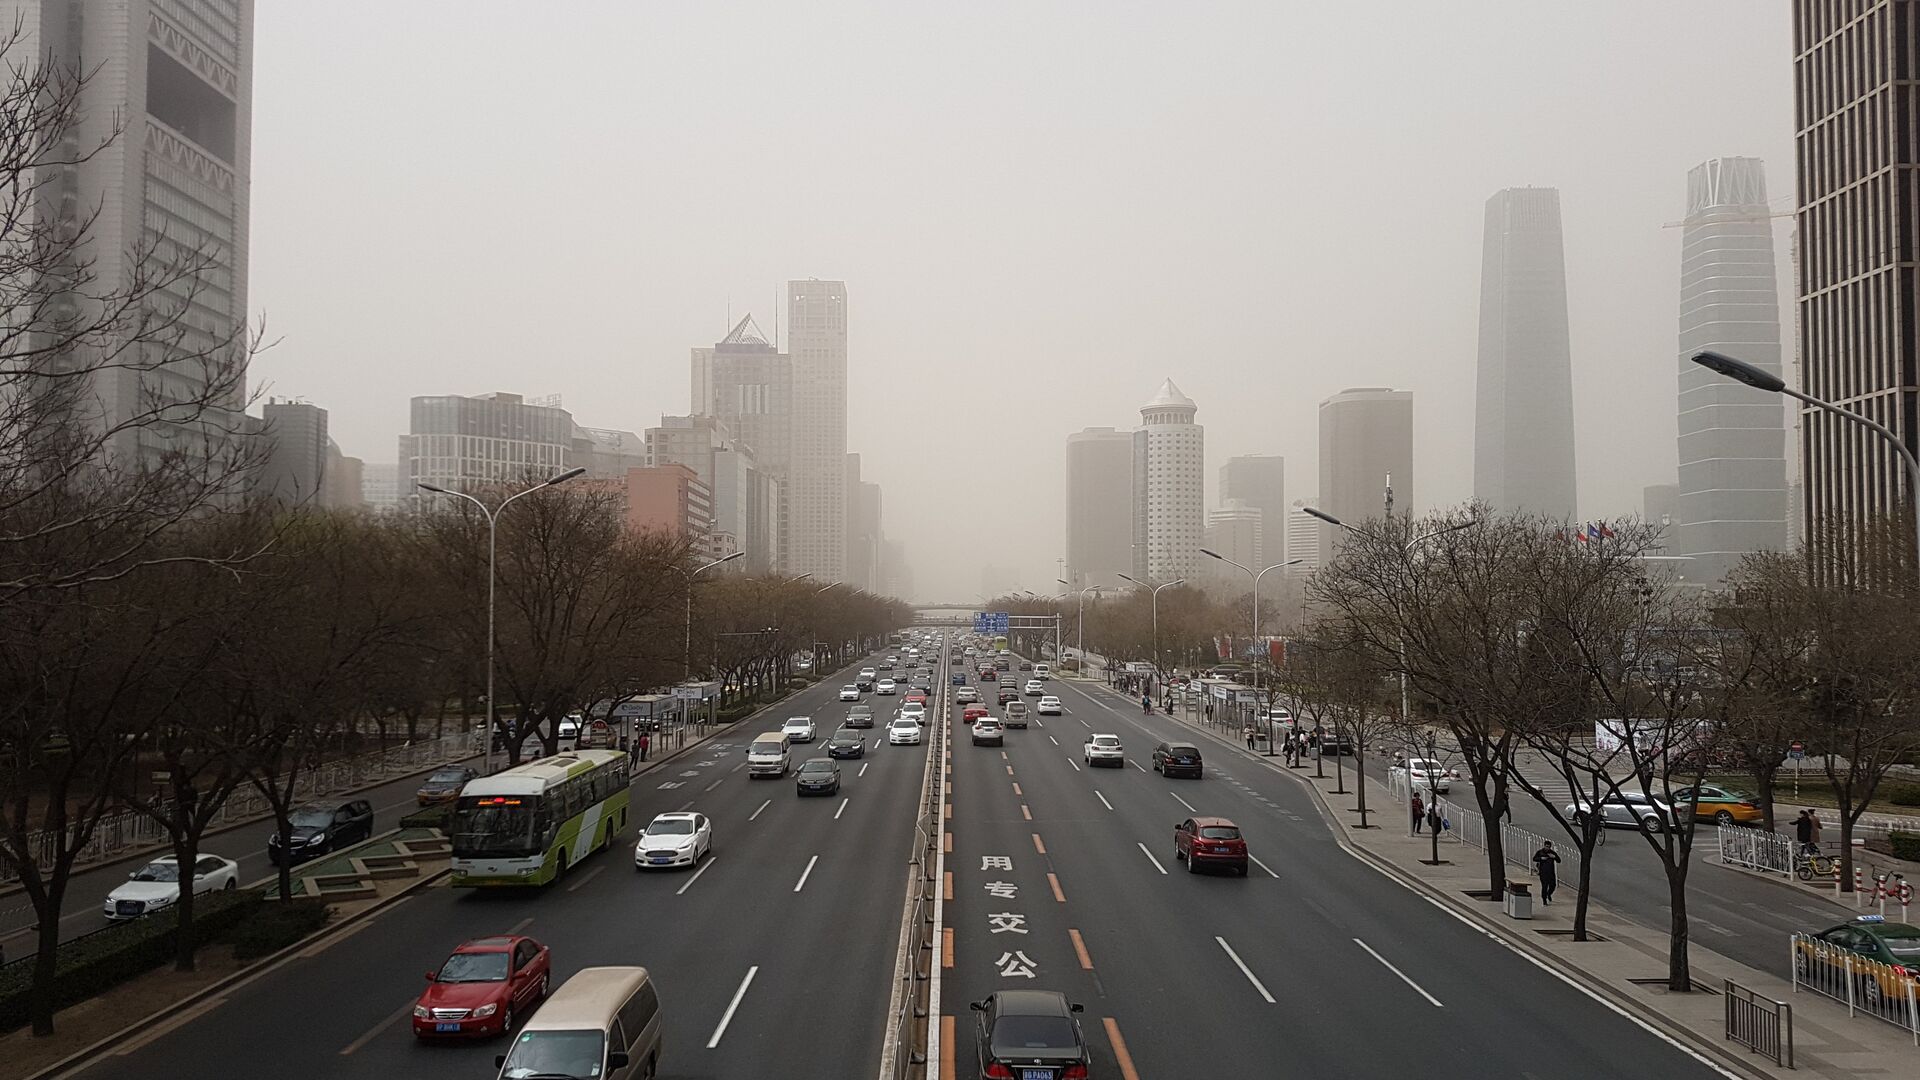 Smog on the street of Beijing city, China.  March 28, 2018 - 1920, 10/22/2021